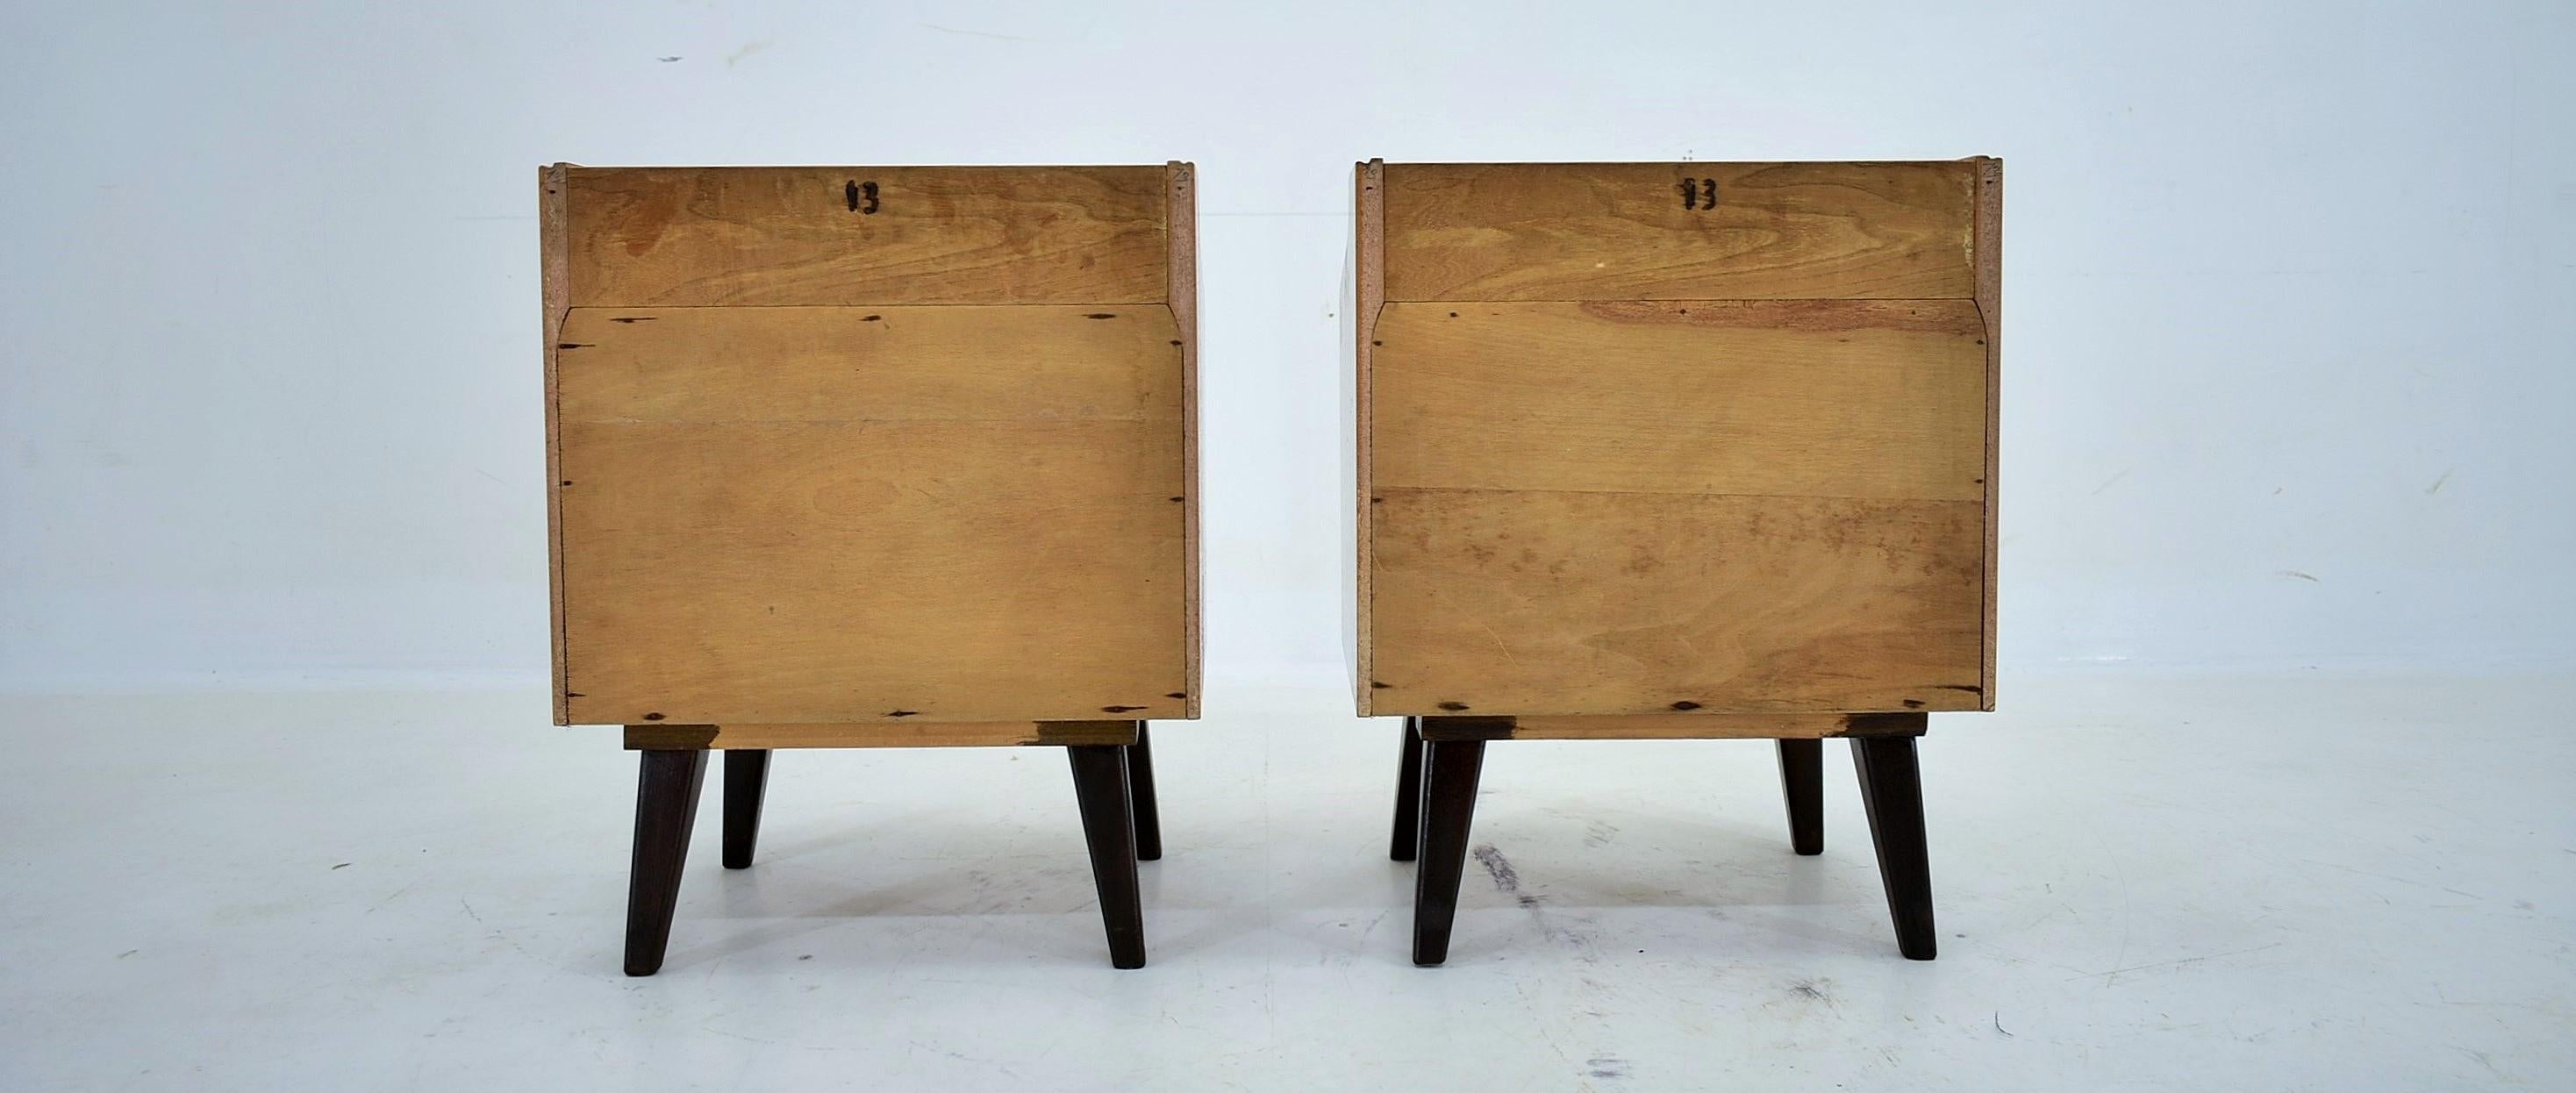 1960s Pair of Midcentury Bedside Tables by Mojmir Požár, Czechoslovakia For Sale 8